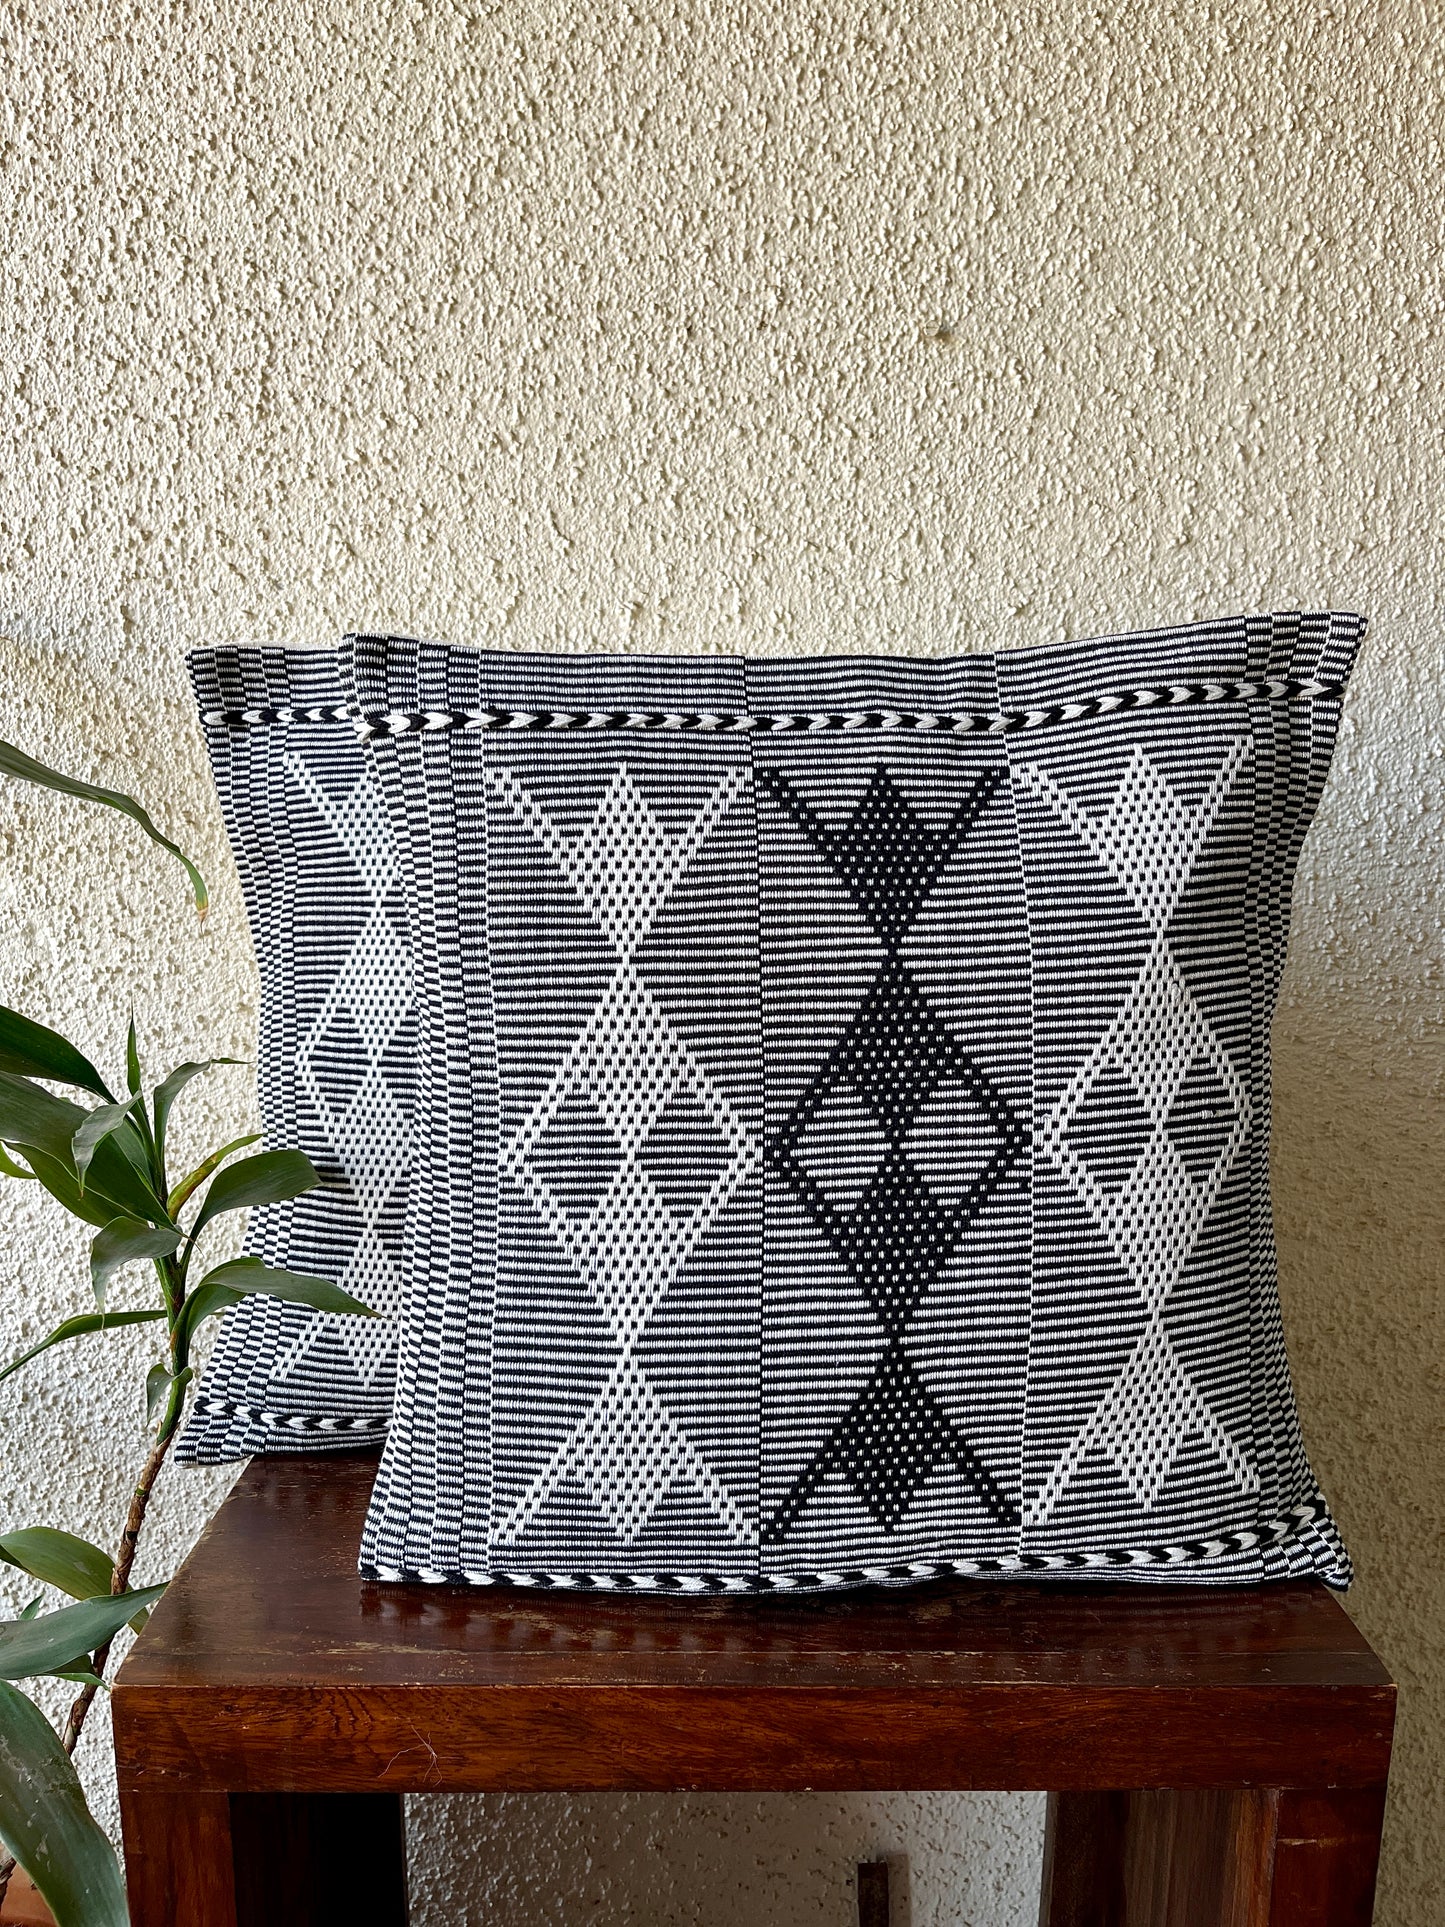 Chizami Weaves - Loin Loom Handwoven Cushion Cover Set in White and Black (Set of 4)